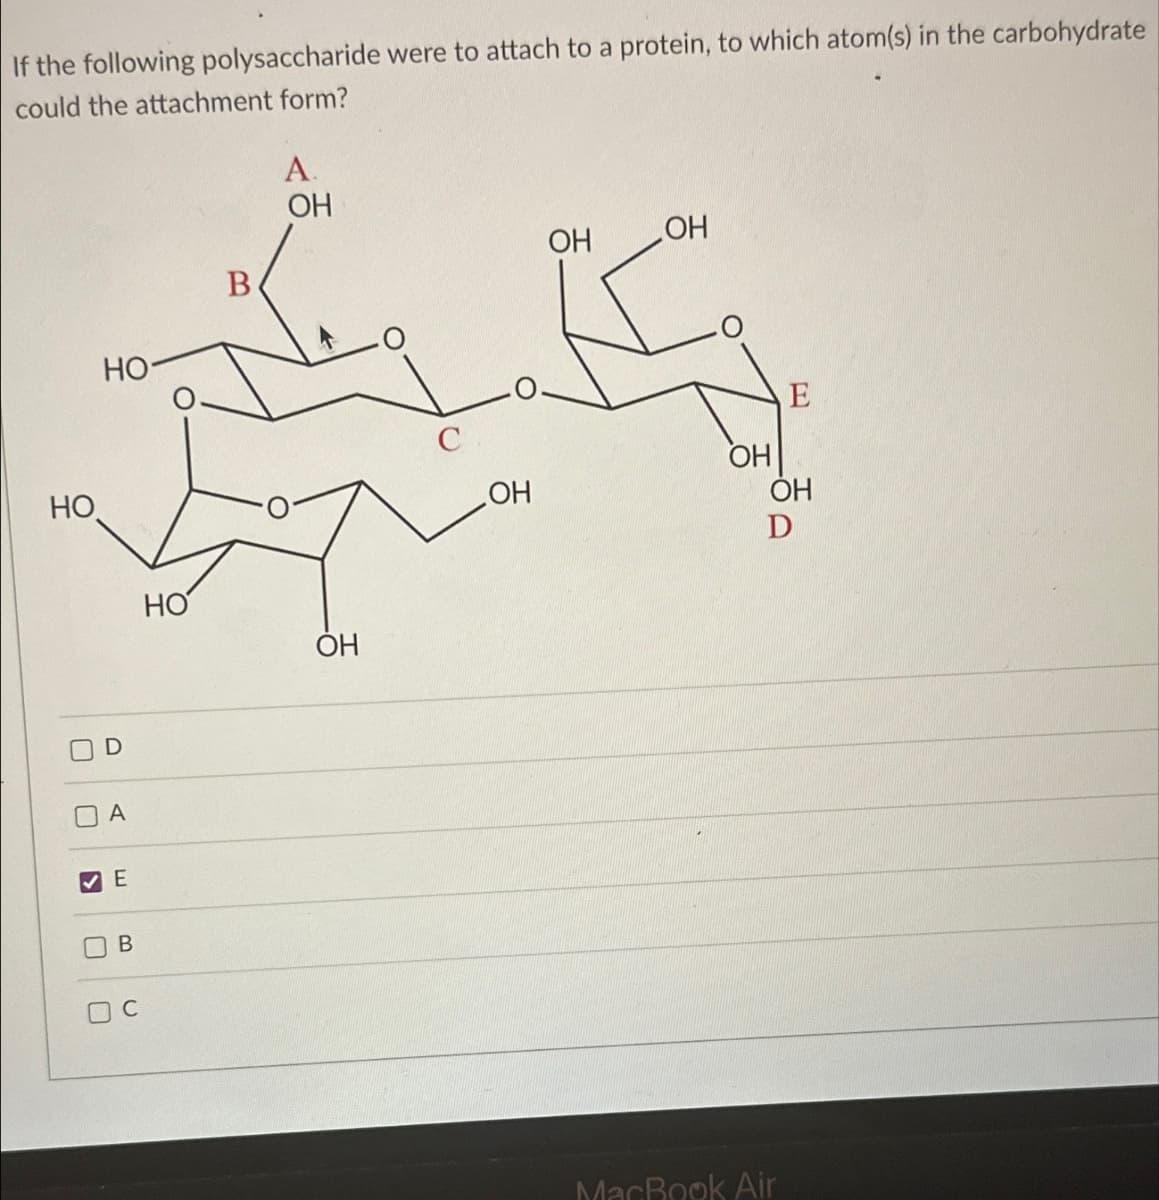 If the following polysaccharide were to attach to a protein, to which atom(s) in the carbohydrate
could the attachment form?
HO
B
HO
U
☐
D
A.
OH
OH
OH
HO
OH
A
▾ E
☐
☐
B
C
E
OH
OH
ㅂ
OH
D
MacBook Air